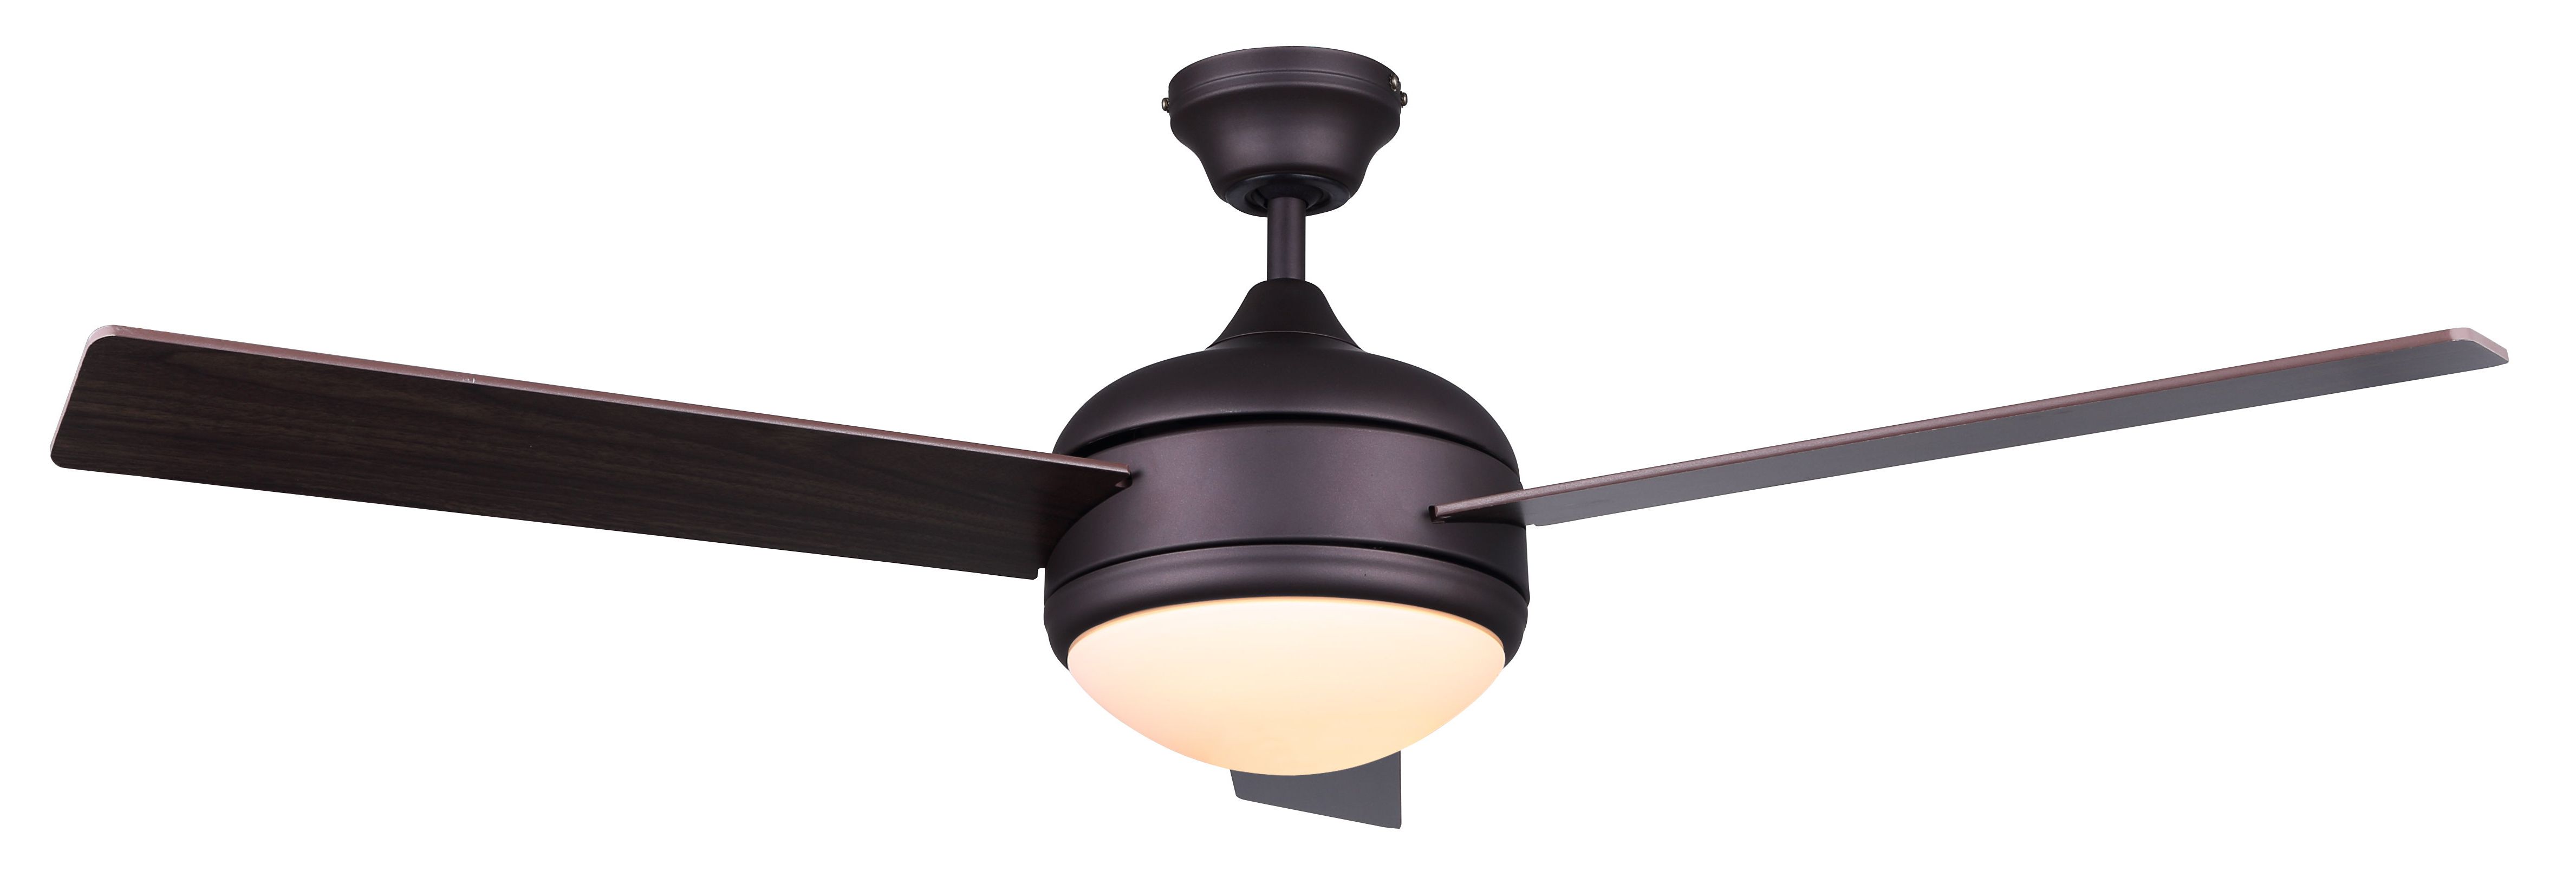 Morton 3 Blade Ceiling Fans Regarding Well Liked 48" Kandi 3 Blade Ceiling Fan With Remote, Light Kit Included (View 6 of 20)